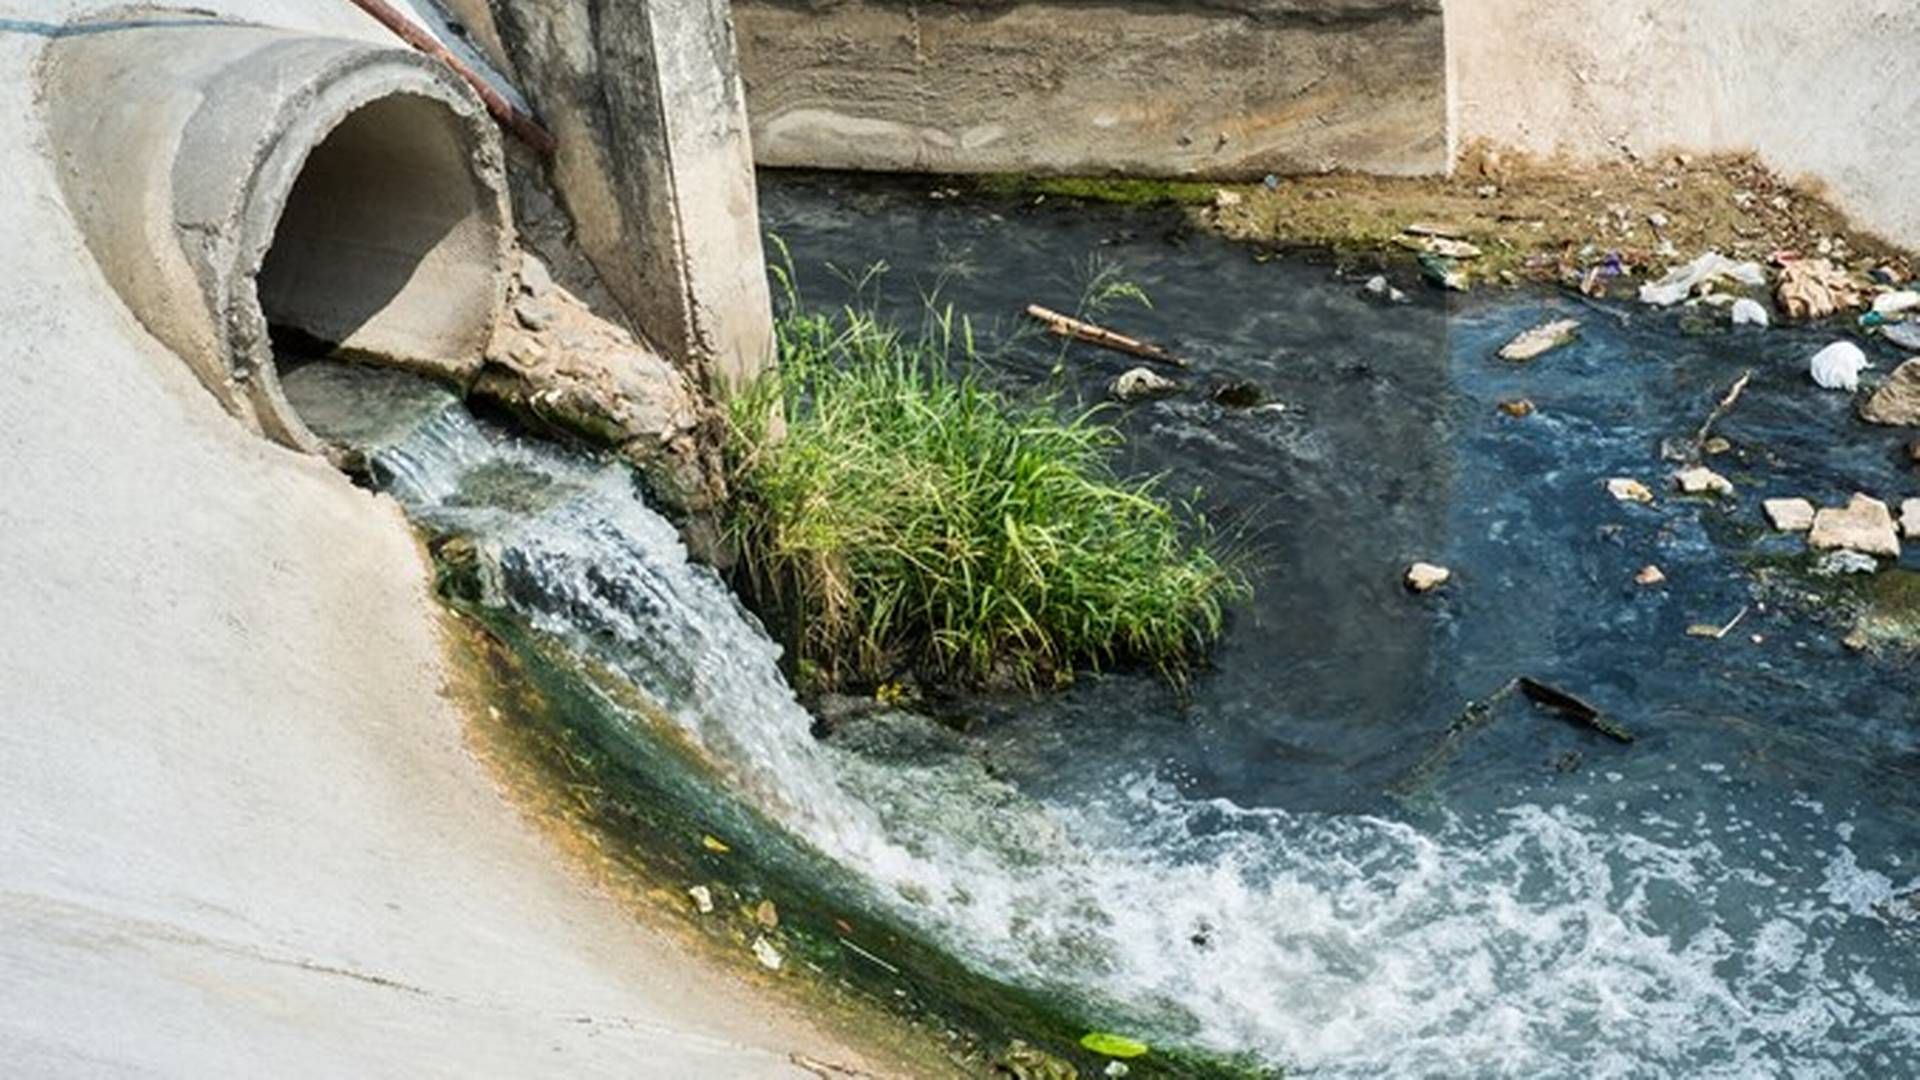 92% of environmentally hazardous drugs in Europe’s wastewater comes from pharmaceuticals and cosmetics, according to the EU Commission | Photo: Miljøstyrelsen